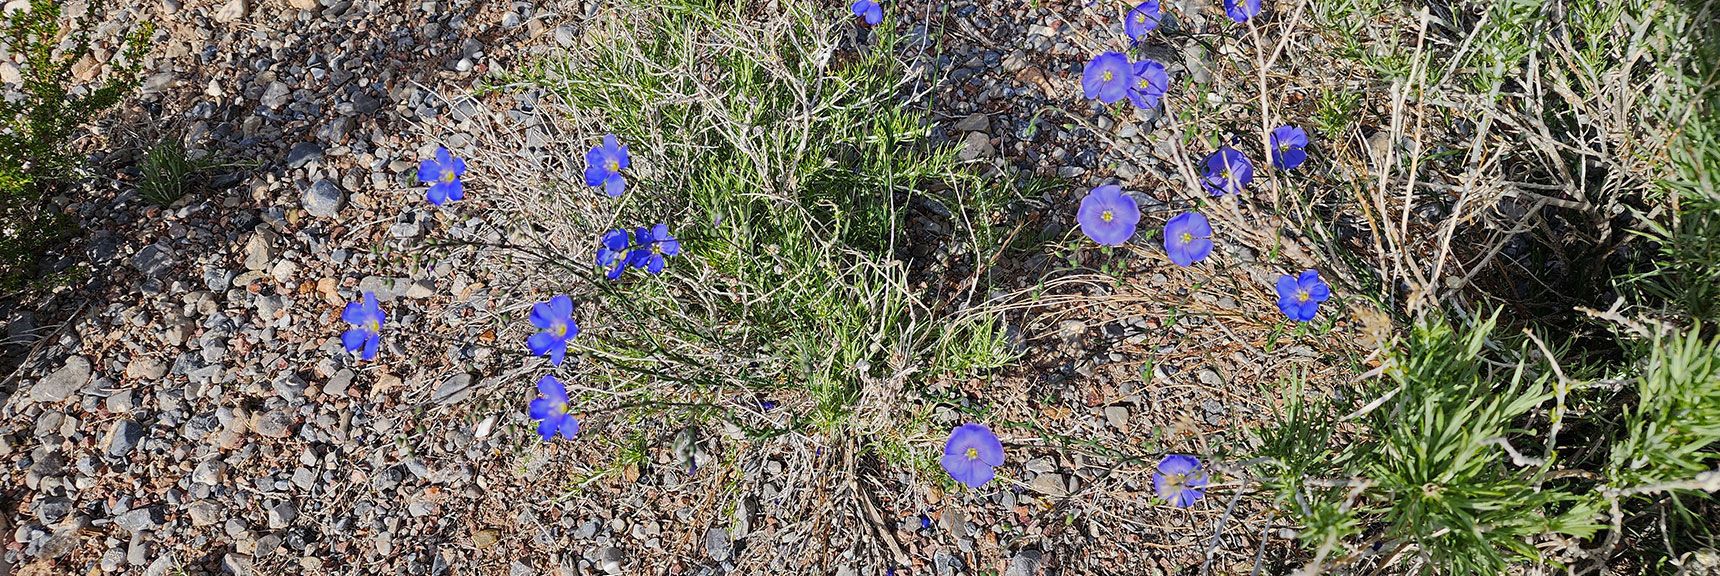 Collecting Now, Will Identify Later | Flowers Above 5000ft | LasVegasAreaTrails.com | Southwestern US | Eagle's Nest Loop, Kyle Canyon, Nevada